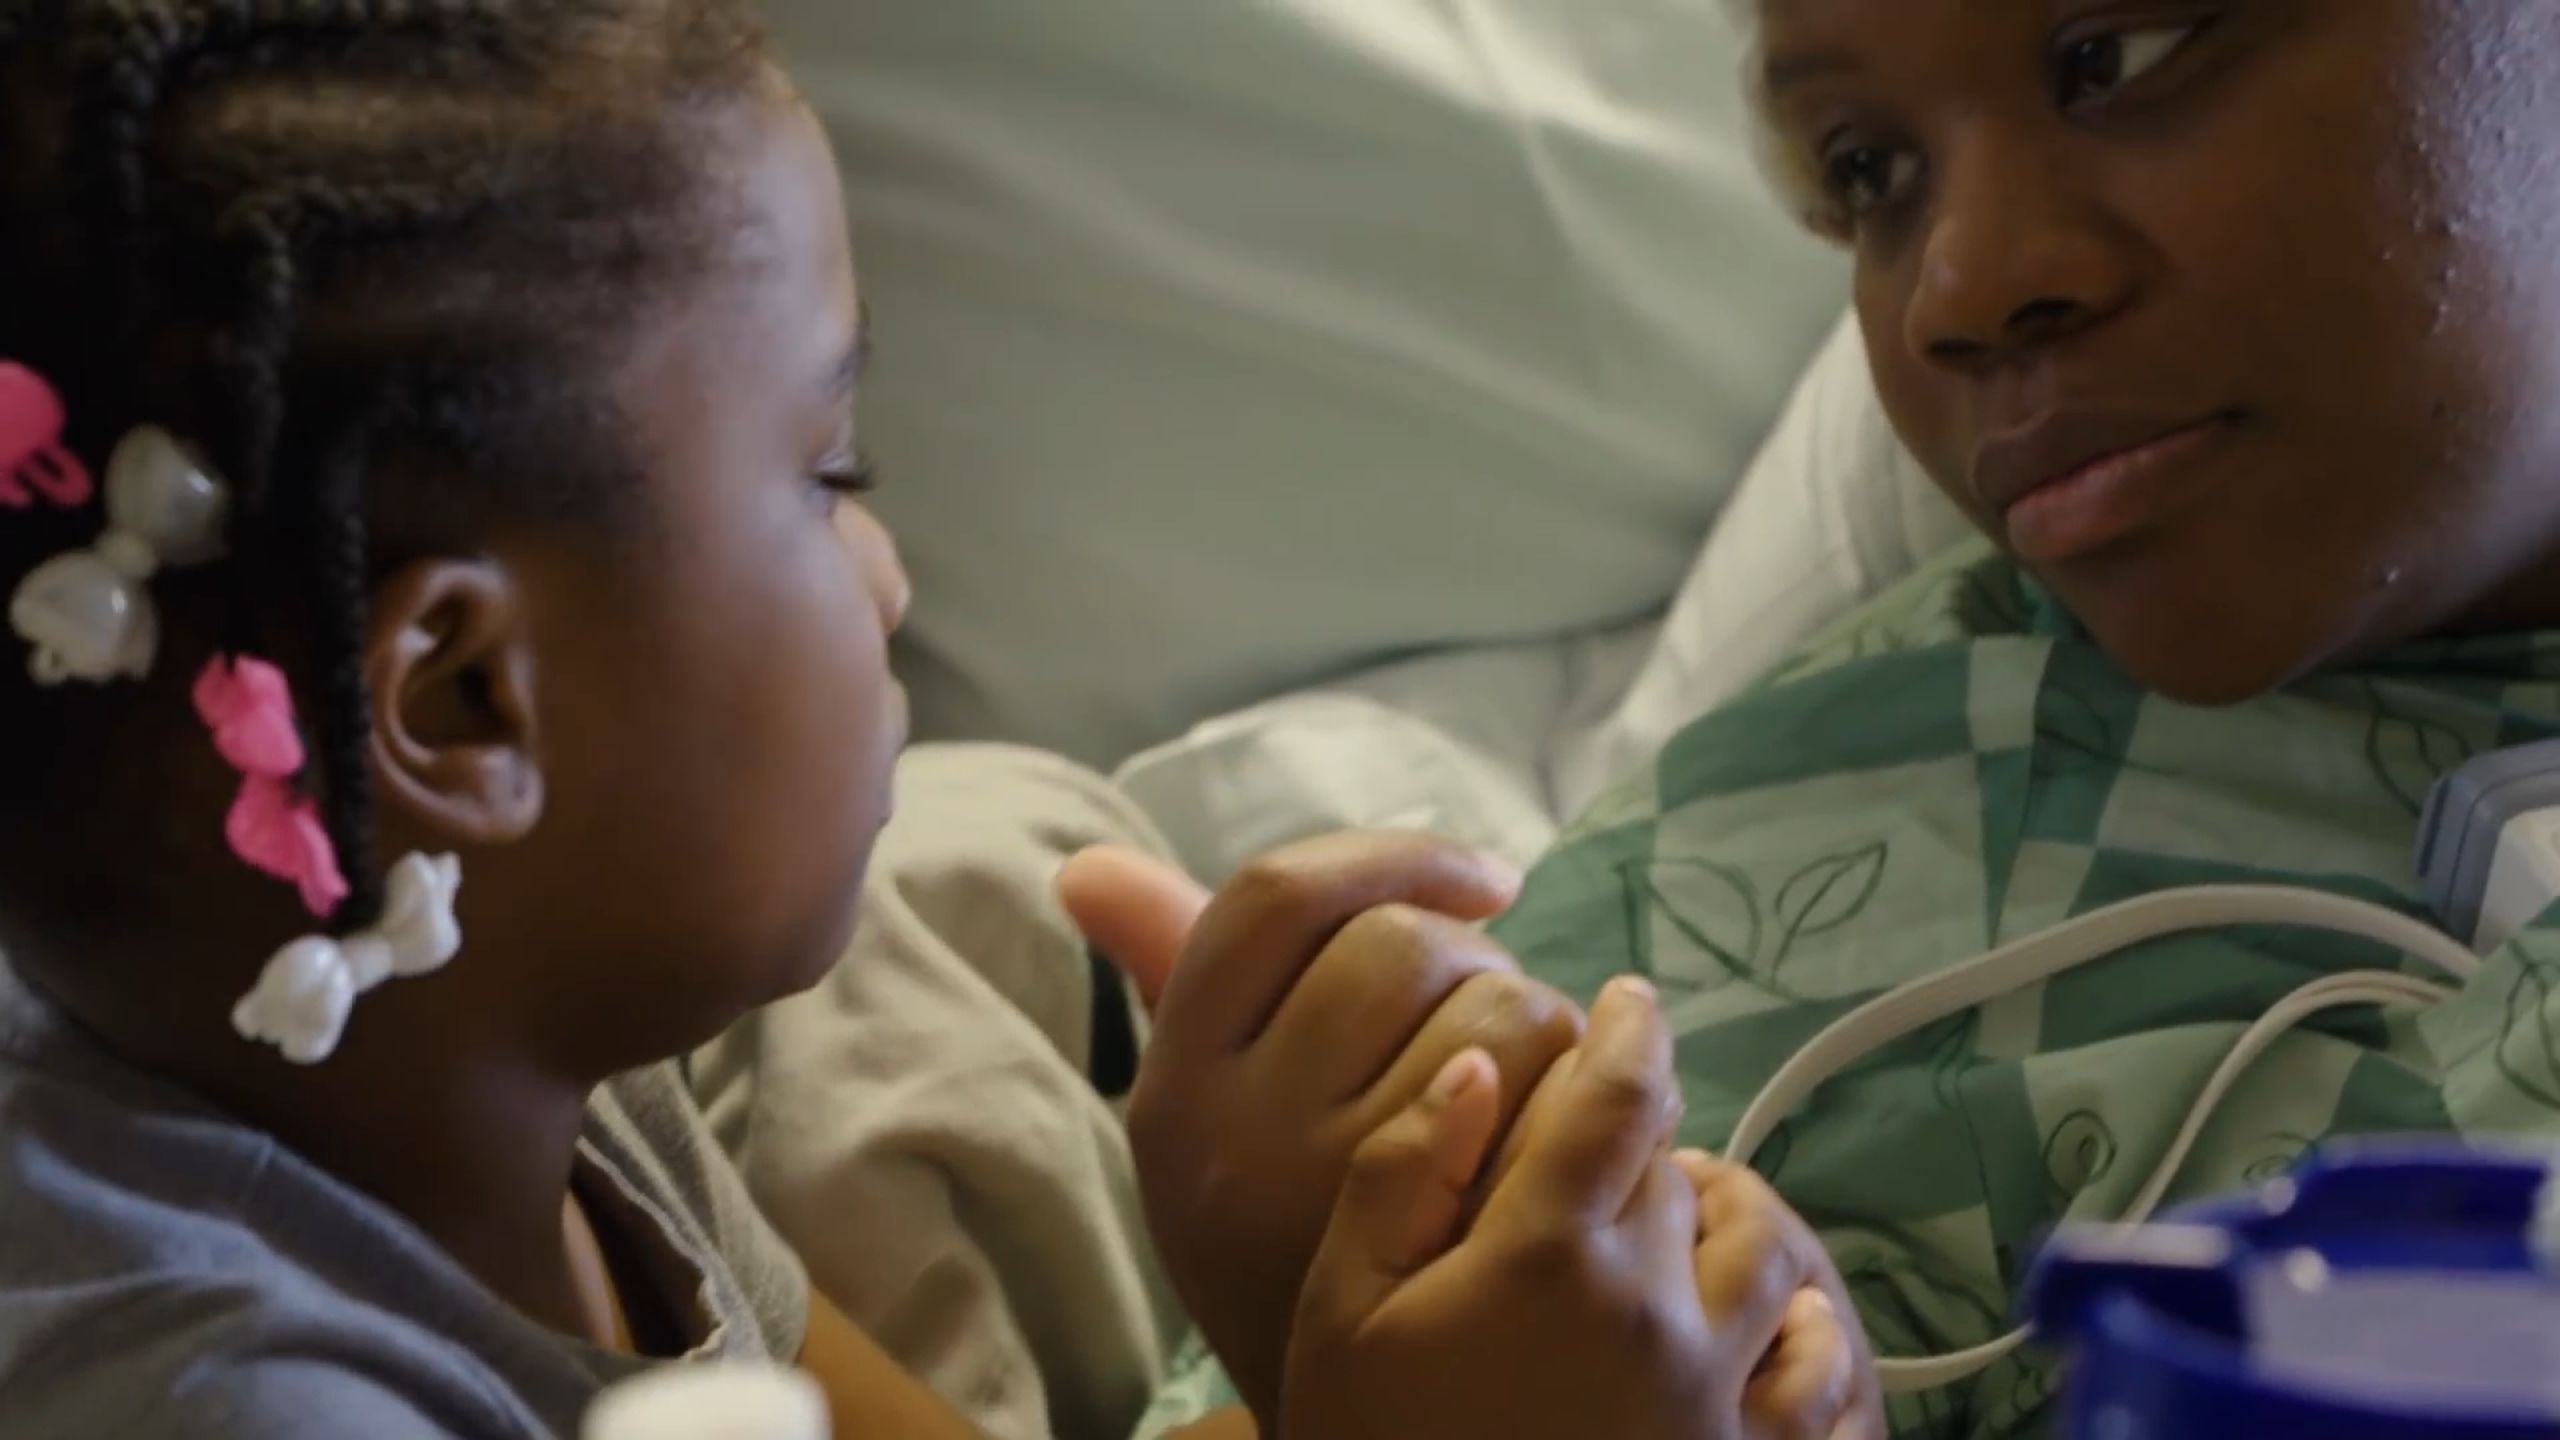 An epilepsy patient in a hospital bed and gown holds her young daughter's hand.